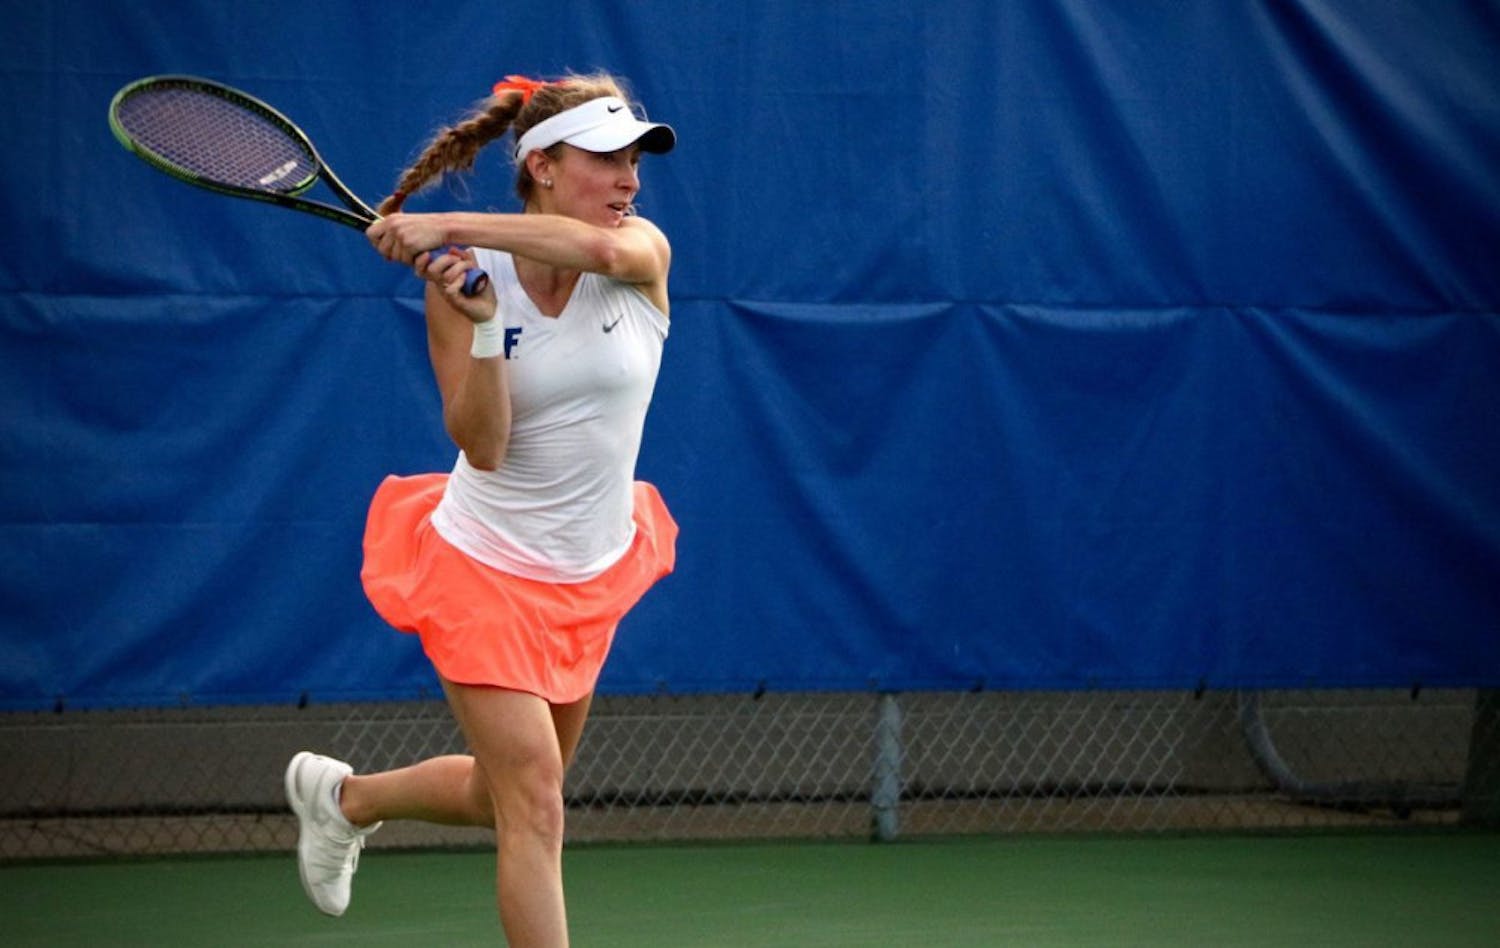 Jose Kuhlman's 6-2, 6-0, victory on Friday helped the Gators defeat Wisconsin 5-0 in the opening round of the ITA National Team Indoor Championships.